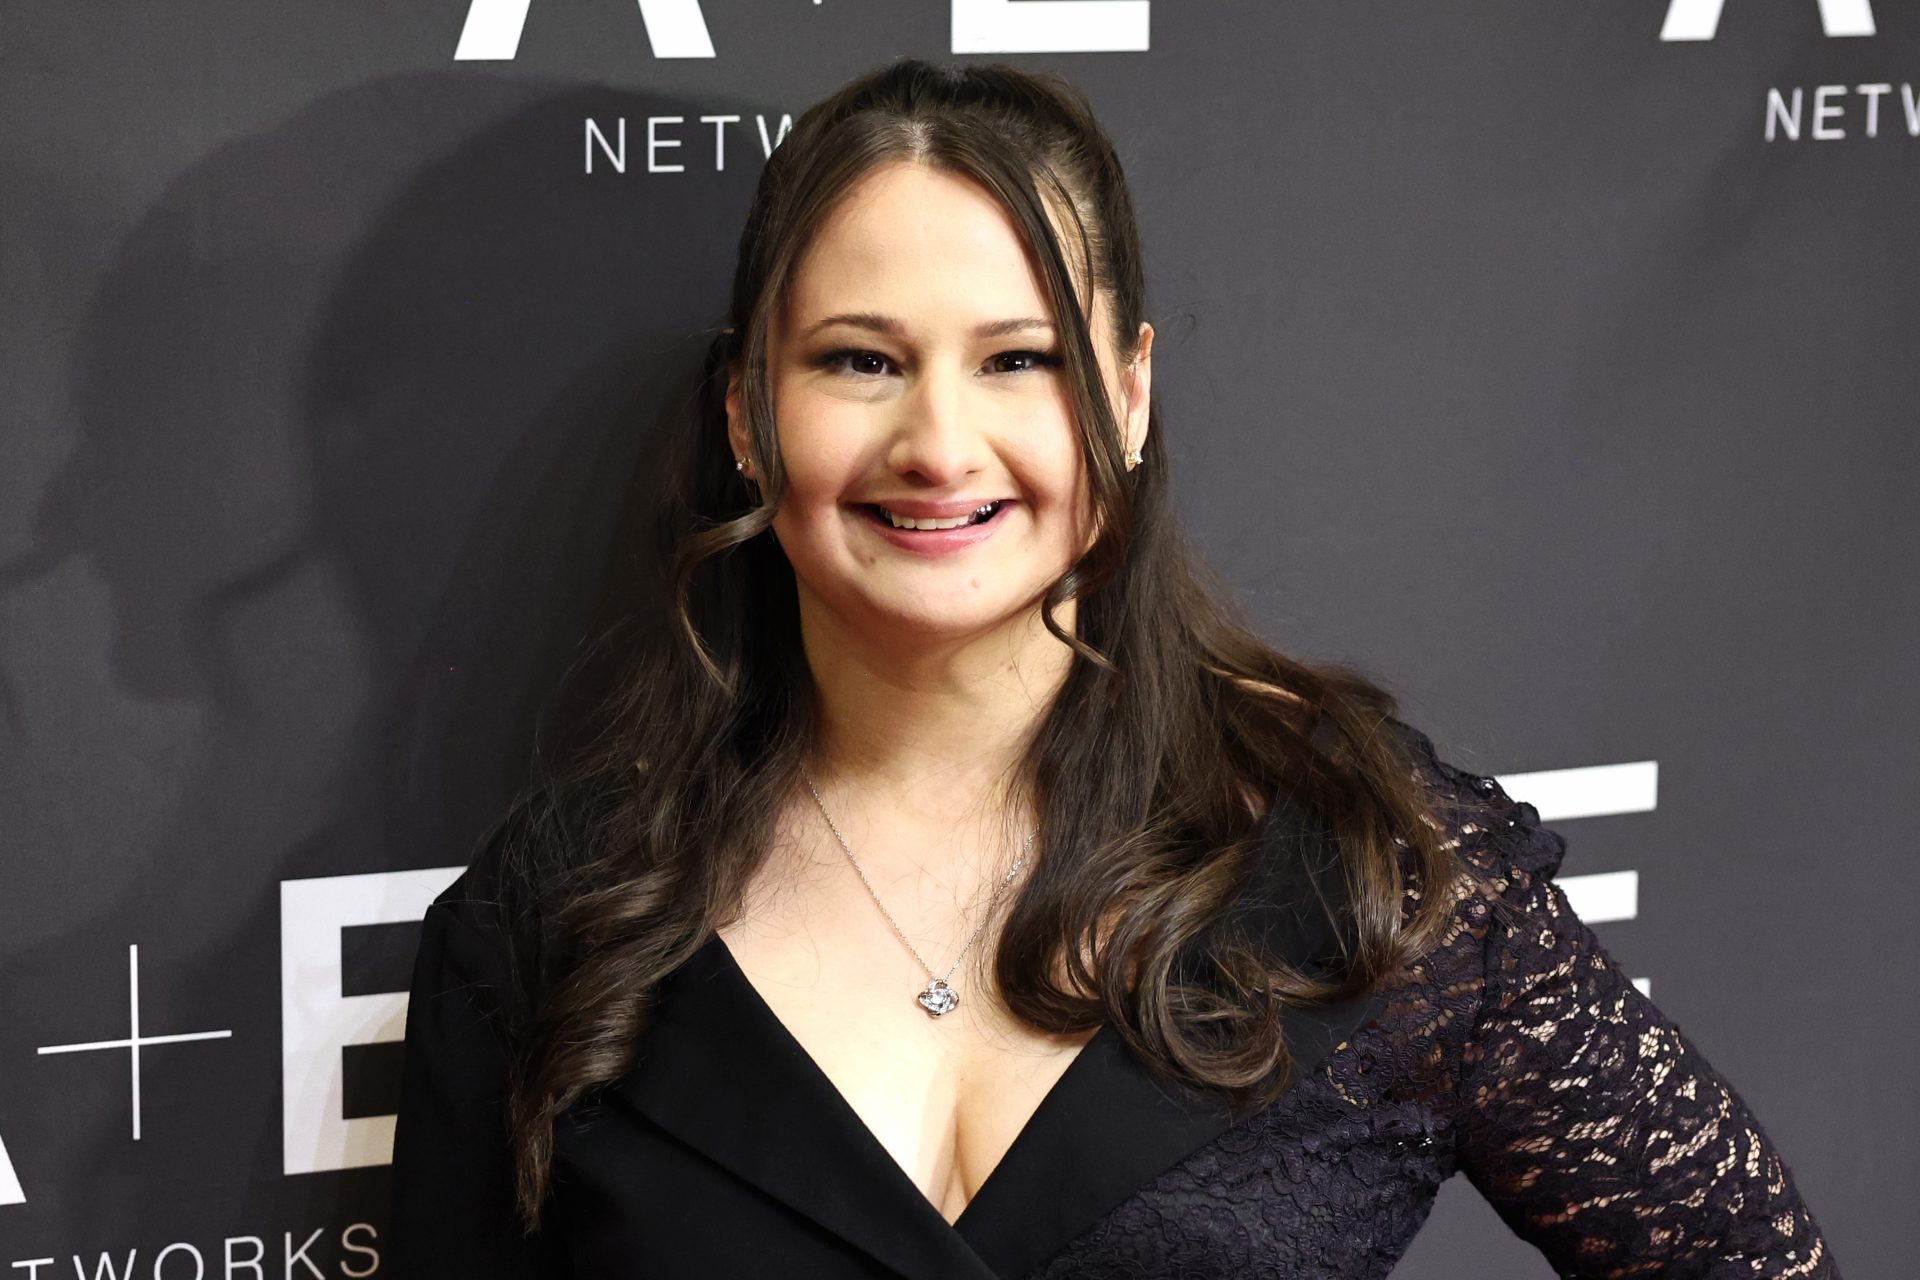 Who is Gypsy Rose Blanchard?